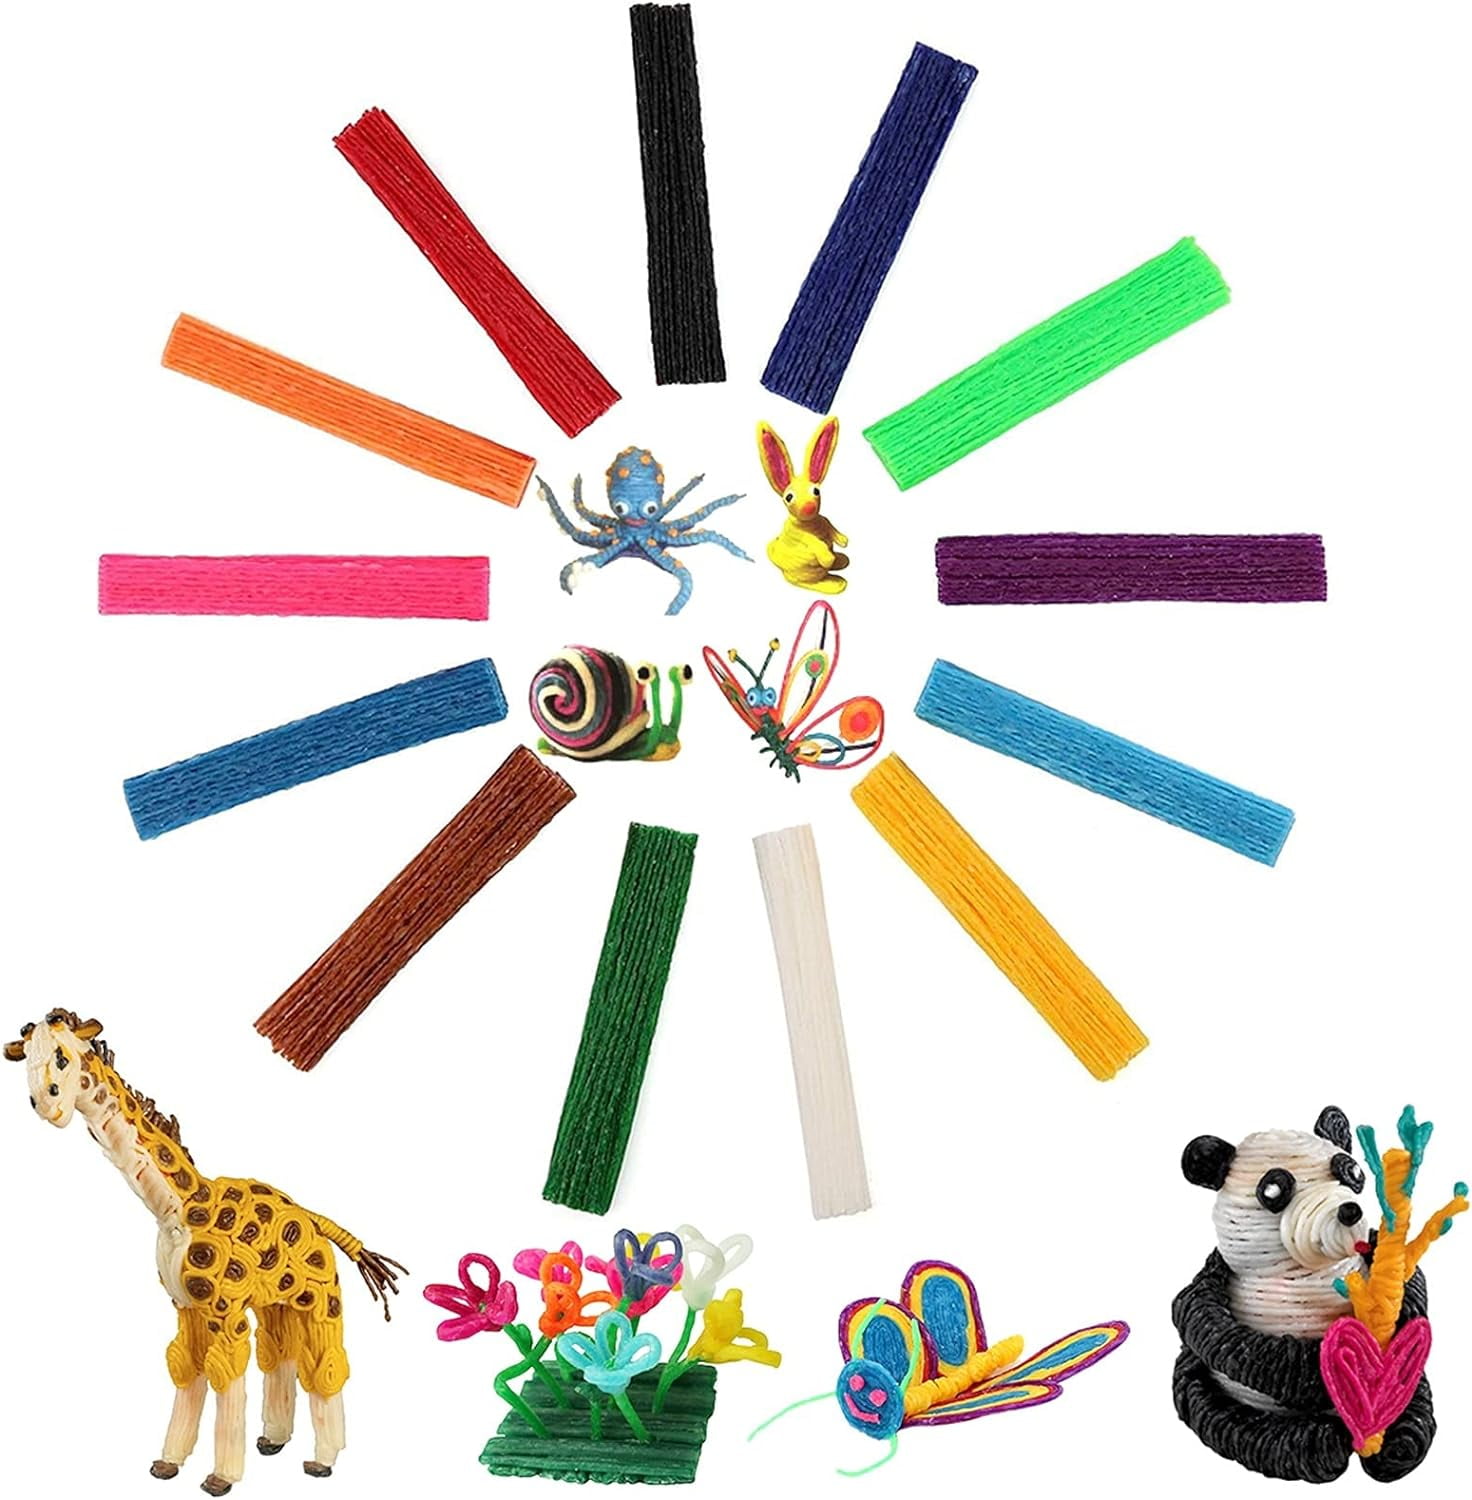 500 Piece Pack Wax Craft Stix Made from Non-Toxic Material-Bendable, Sticky  Sticks of 13 Kinds of Bright Colors in Bulk. Perfect Travel Toys, Gifts for  Children DIY, Used for School Project Handicraft 